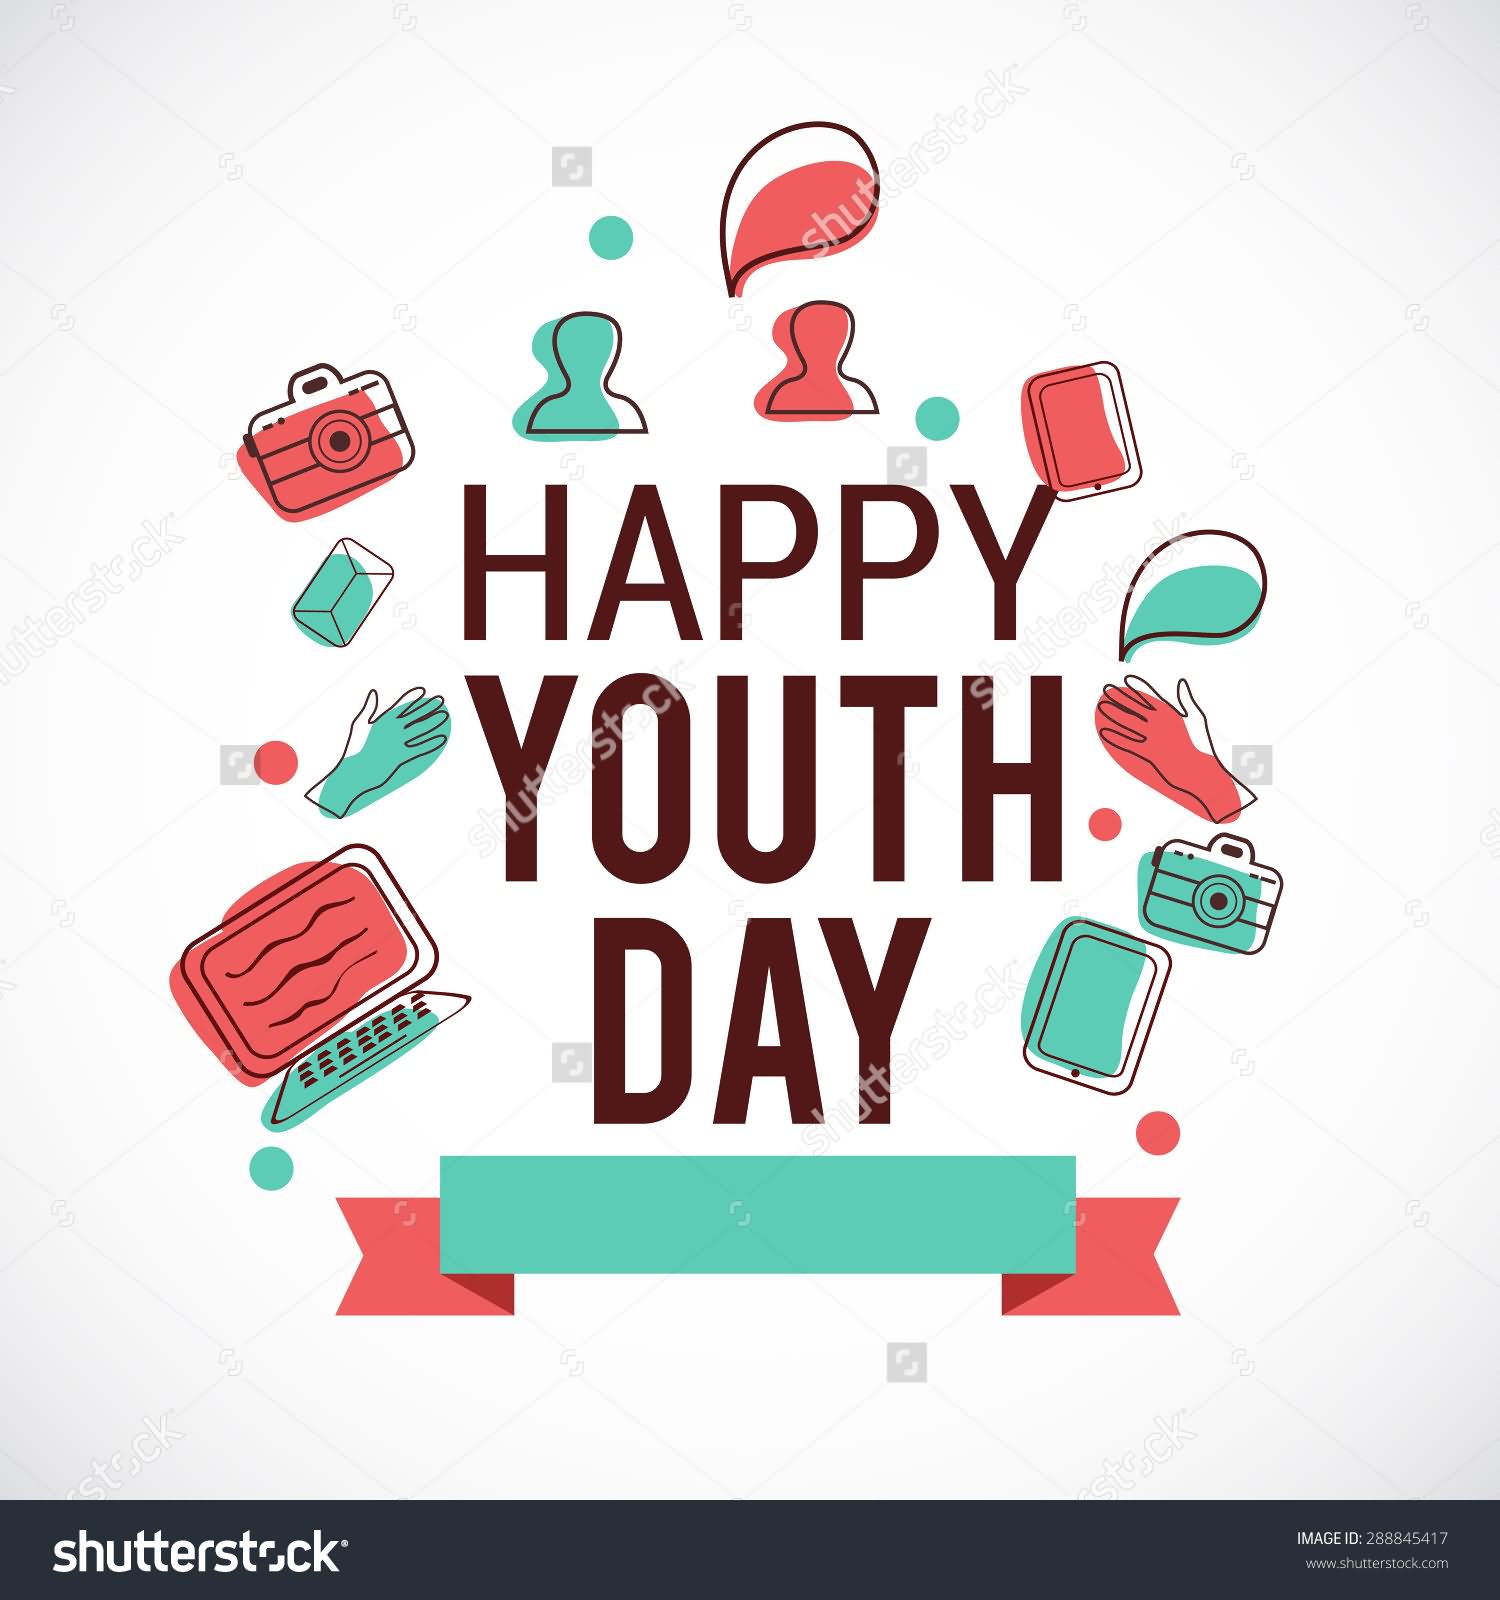 Happy Youth Day Wishes Picture